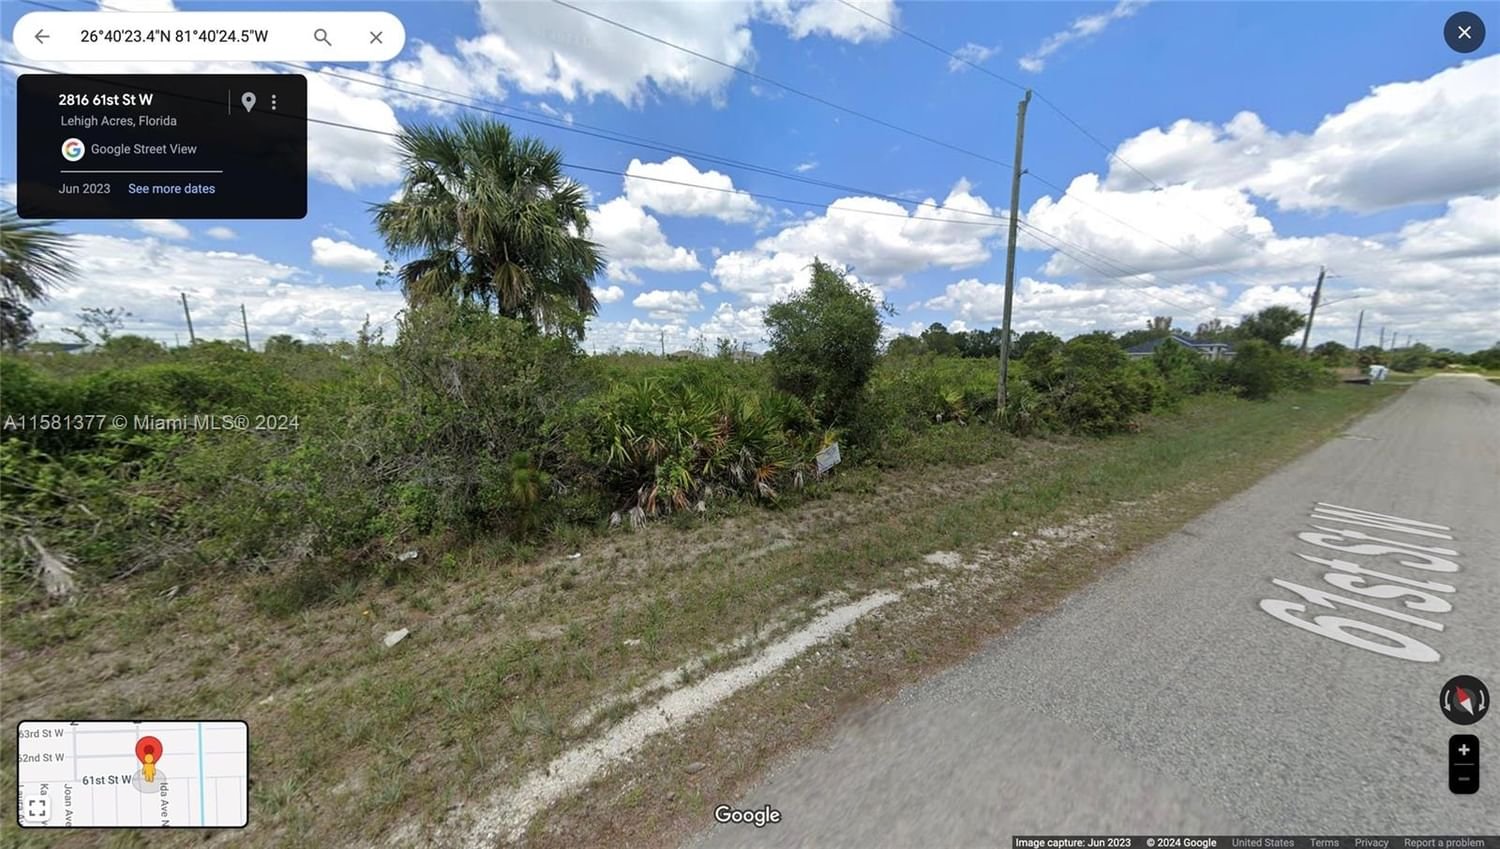 Real estate property located at 2816 61st W, Lee County, NA, Lehigh Acres, FL